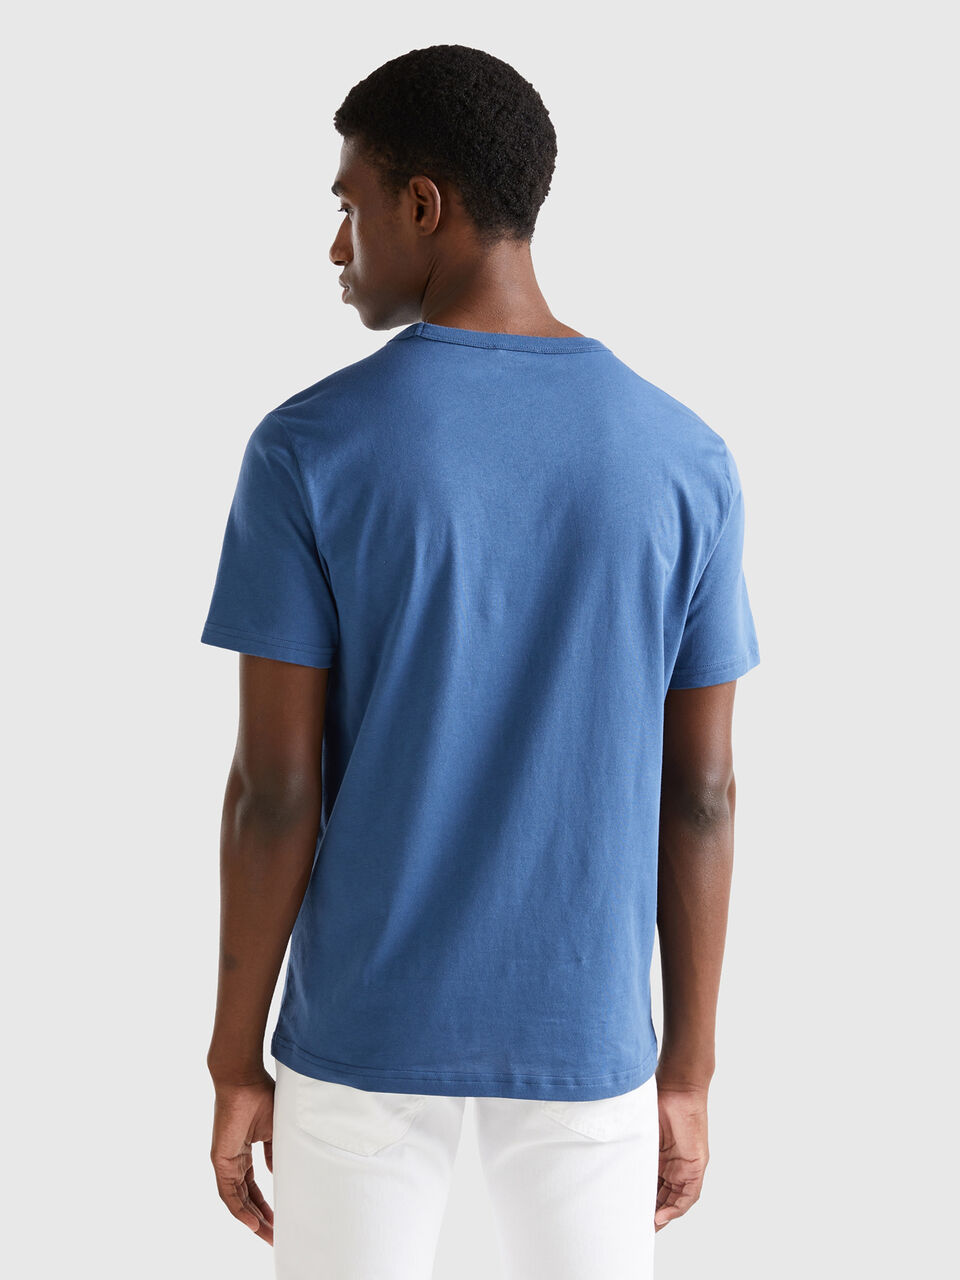 logo in - | Benetton Force Blue organic blue print cotton Air t-shirt Air with force